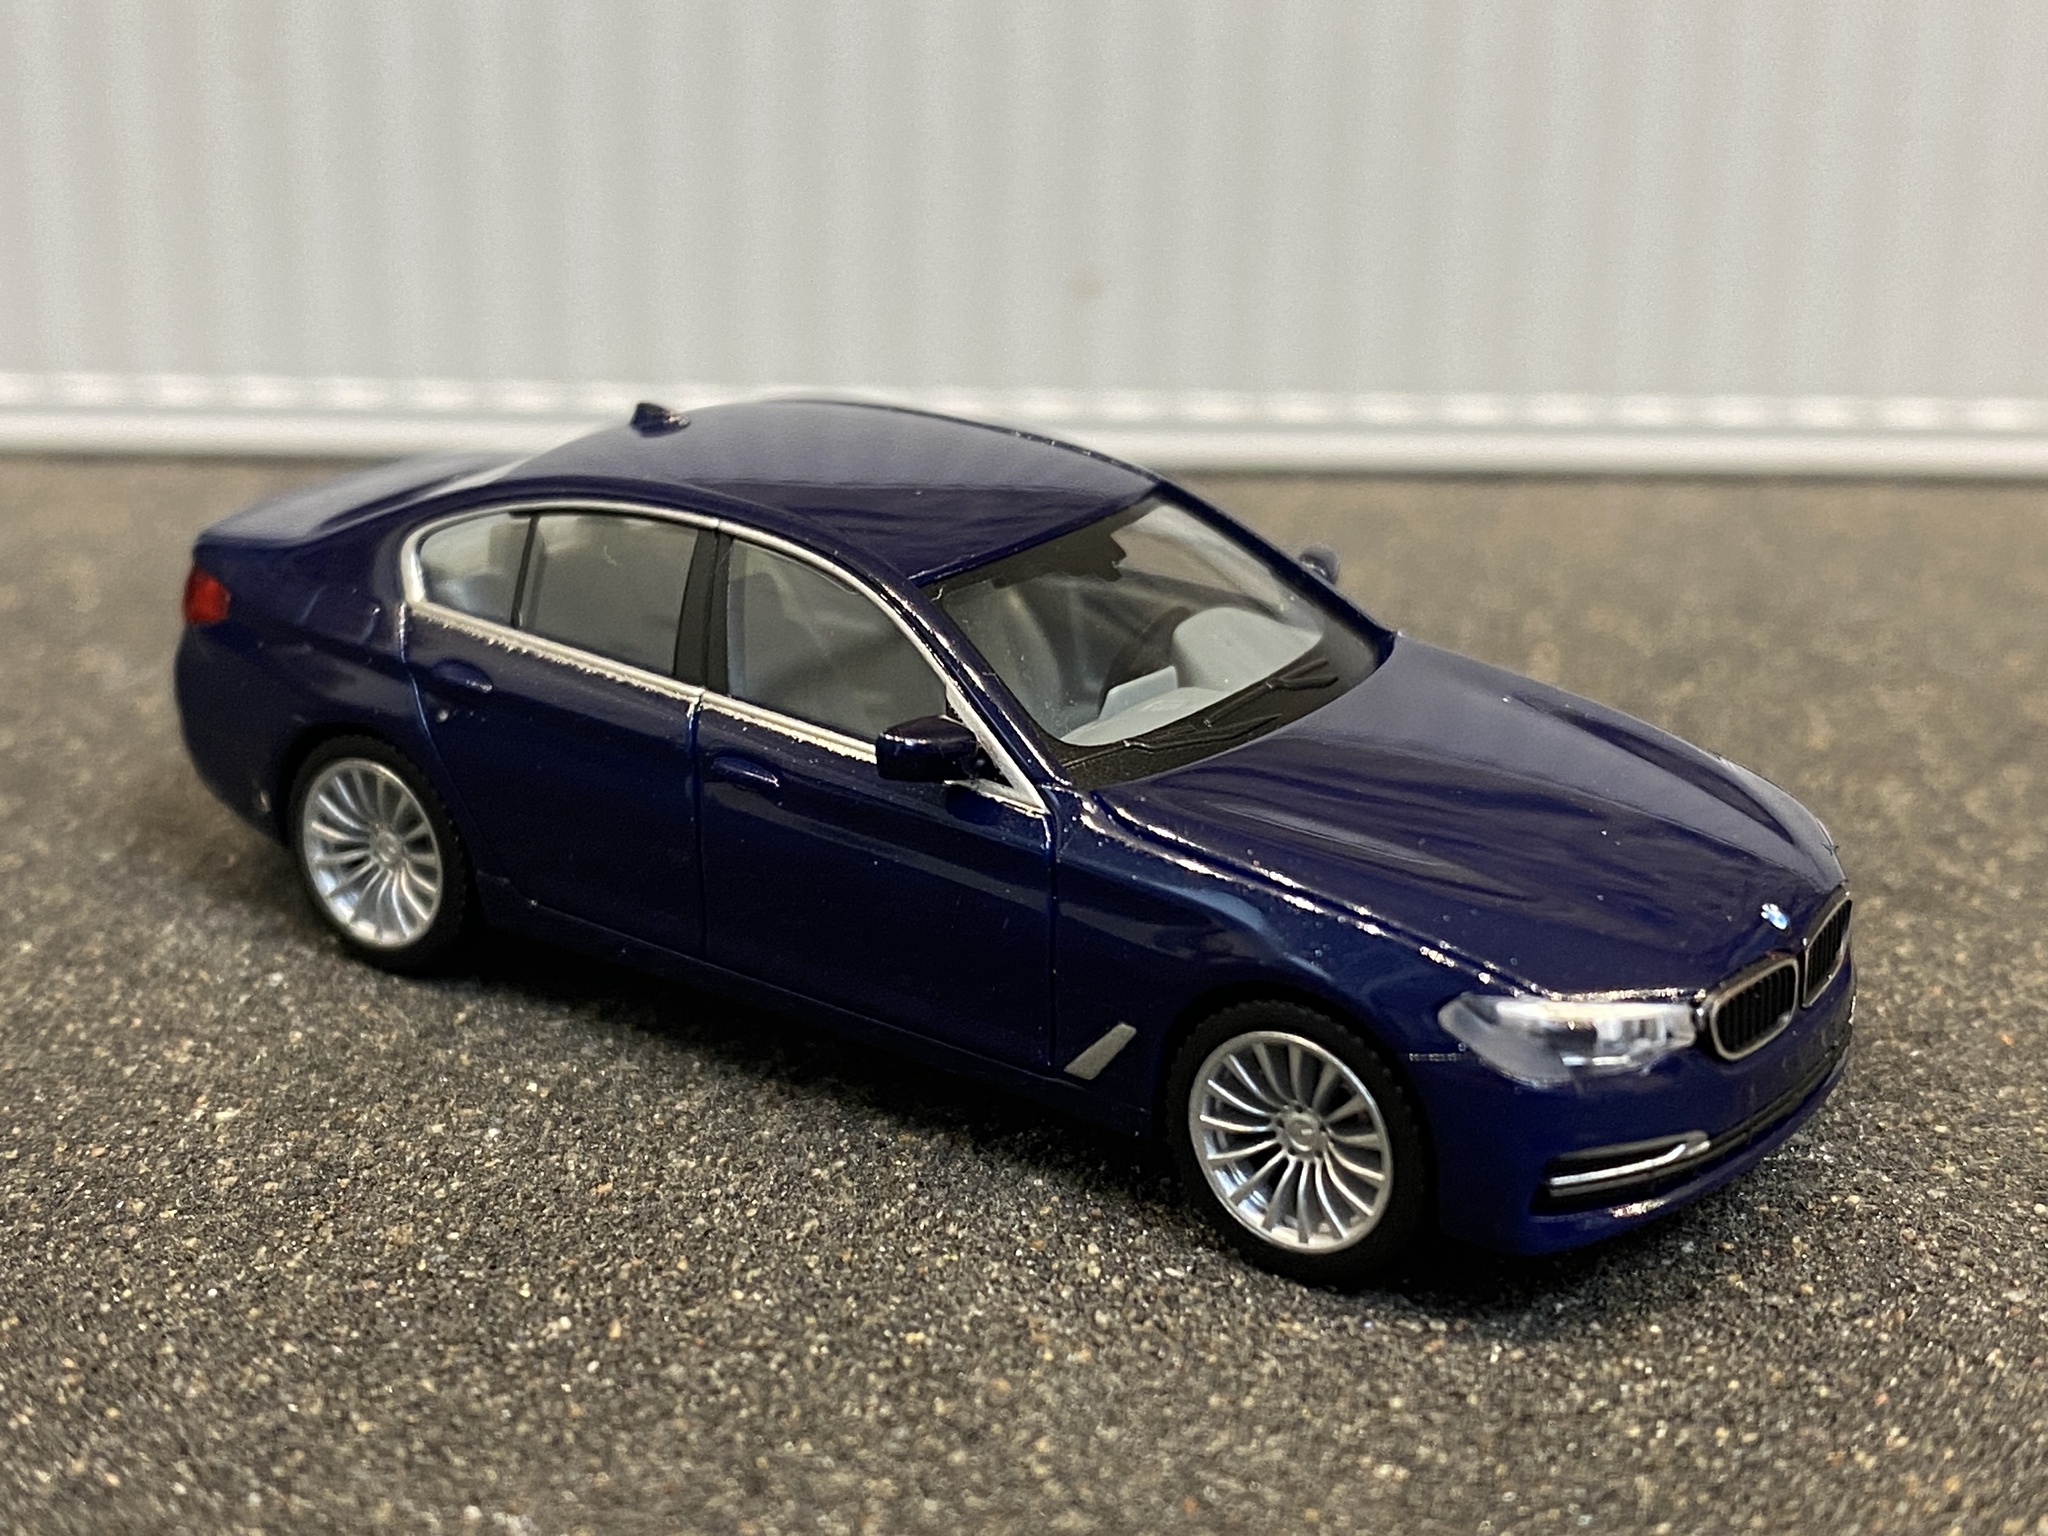 Scale 1/87 H0, BMW 5 series LIMO TM, Dark blue from Herpa